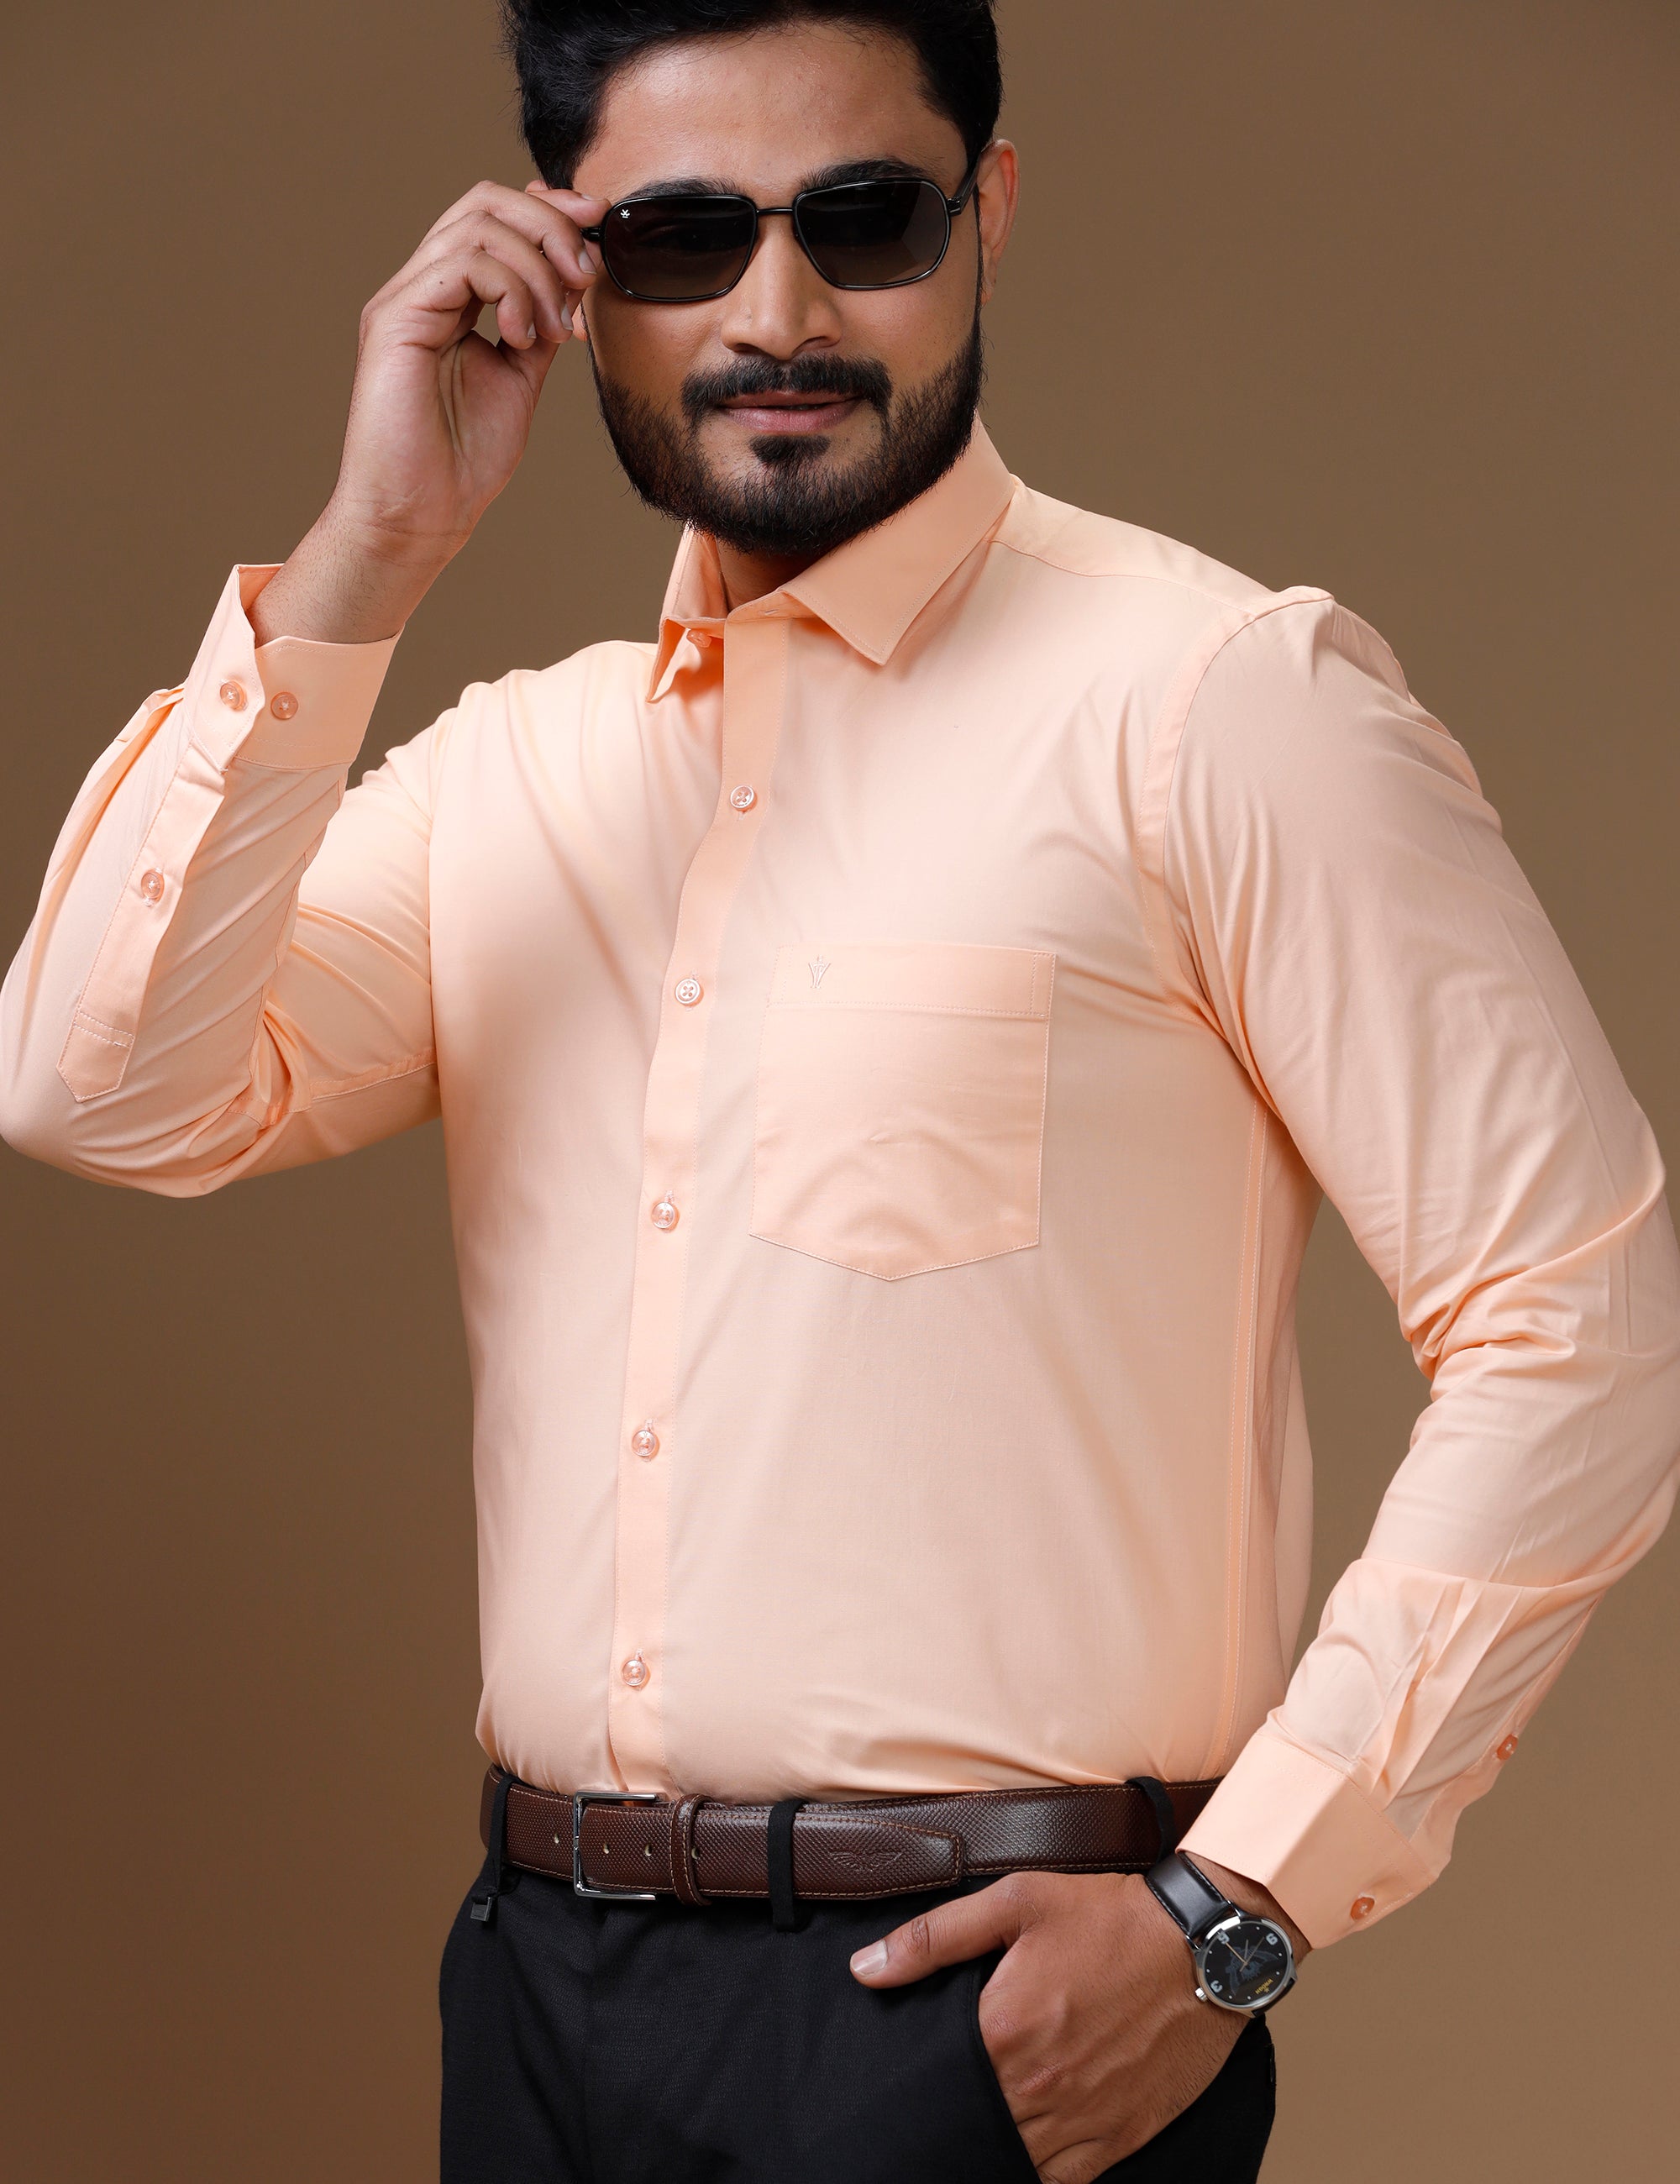 Mens Formal Cotton Spandex 2 Way Stretch Full Sleeves Saffron Shirt LY7-Front view